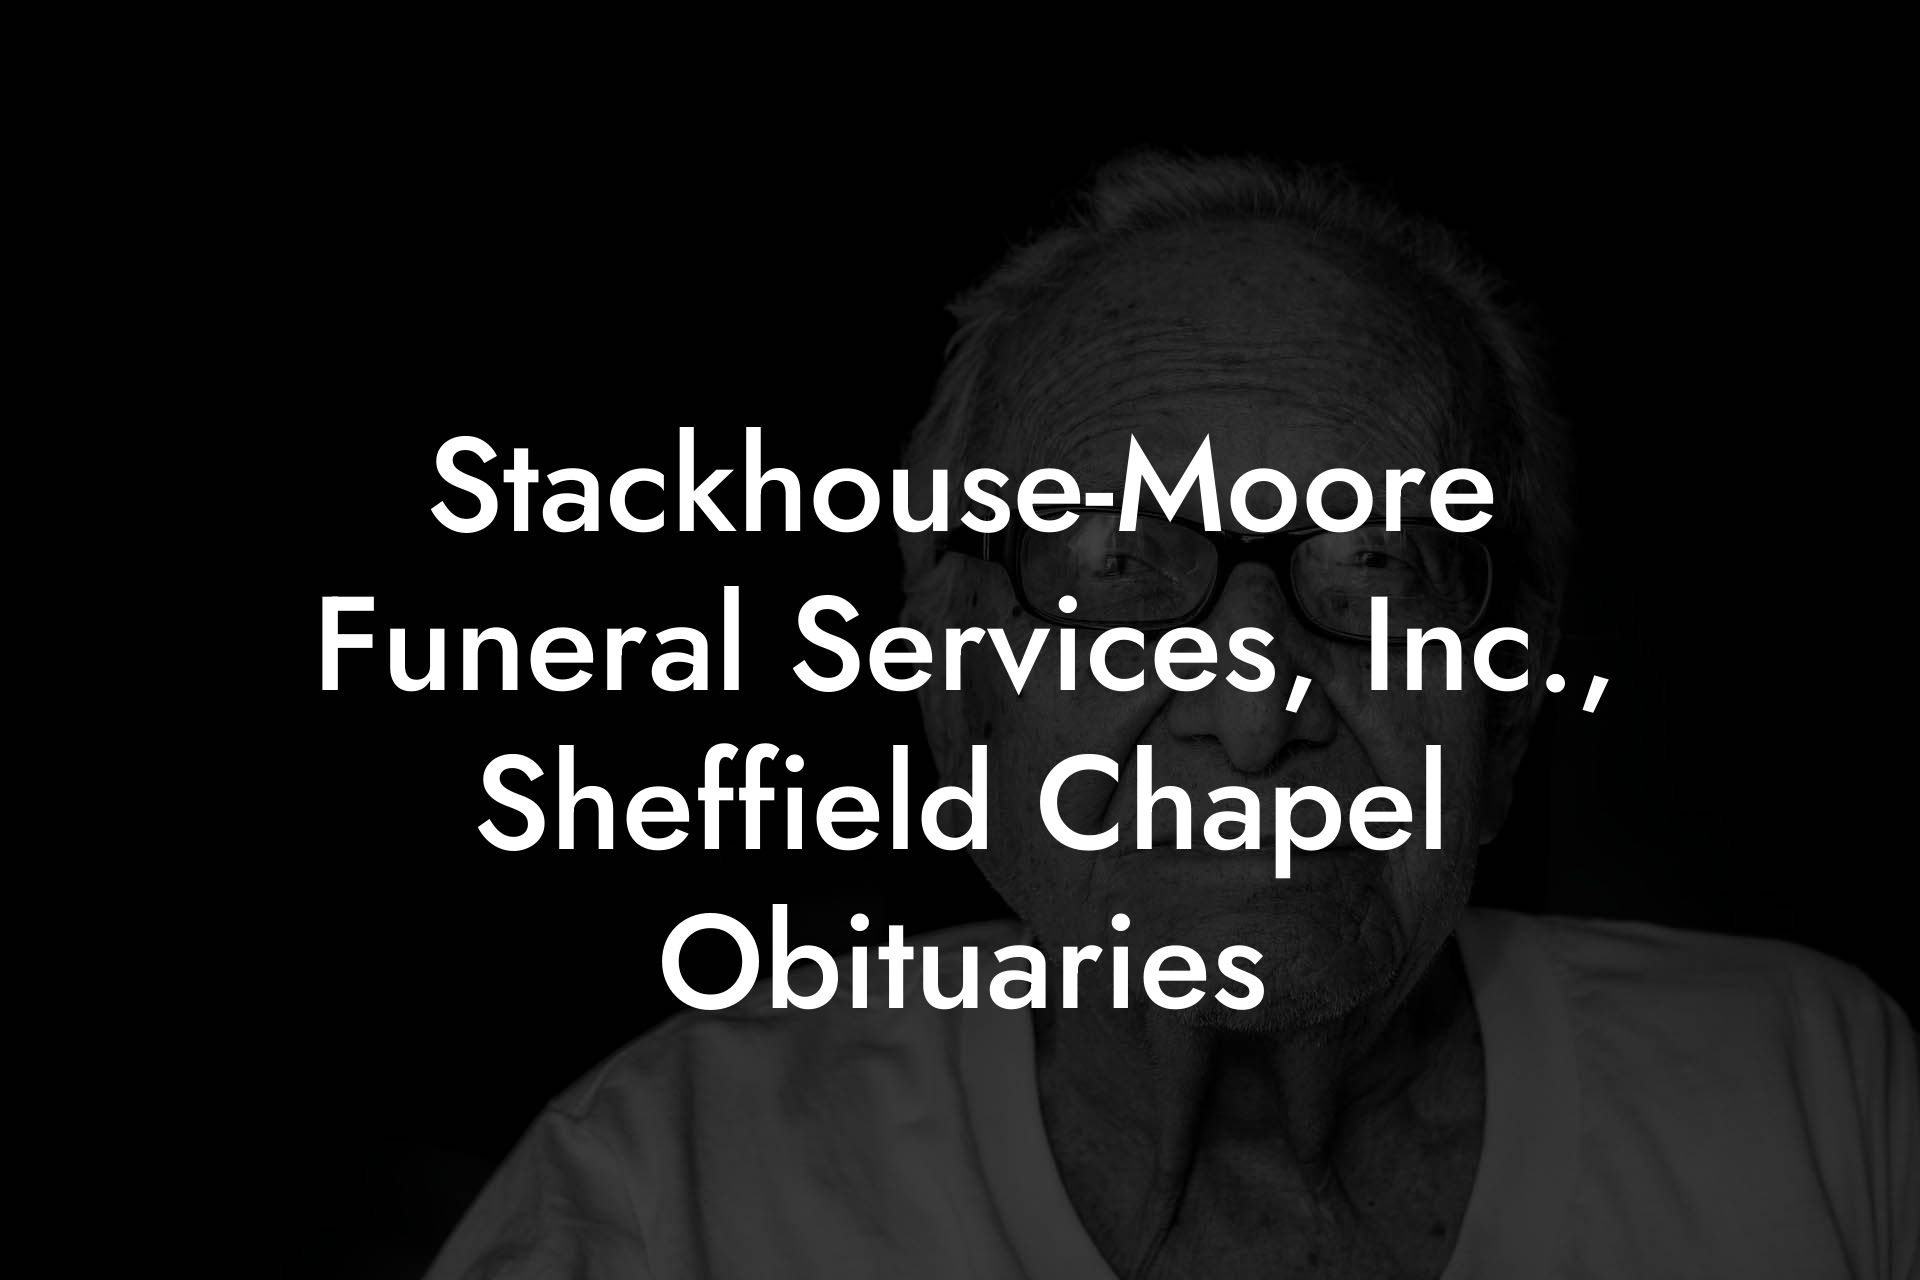 Stackhouse-Moore Funeral Services, Inc., Sheffield Chapel Obituaries